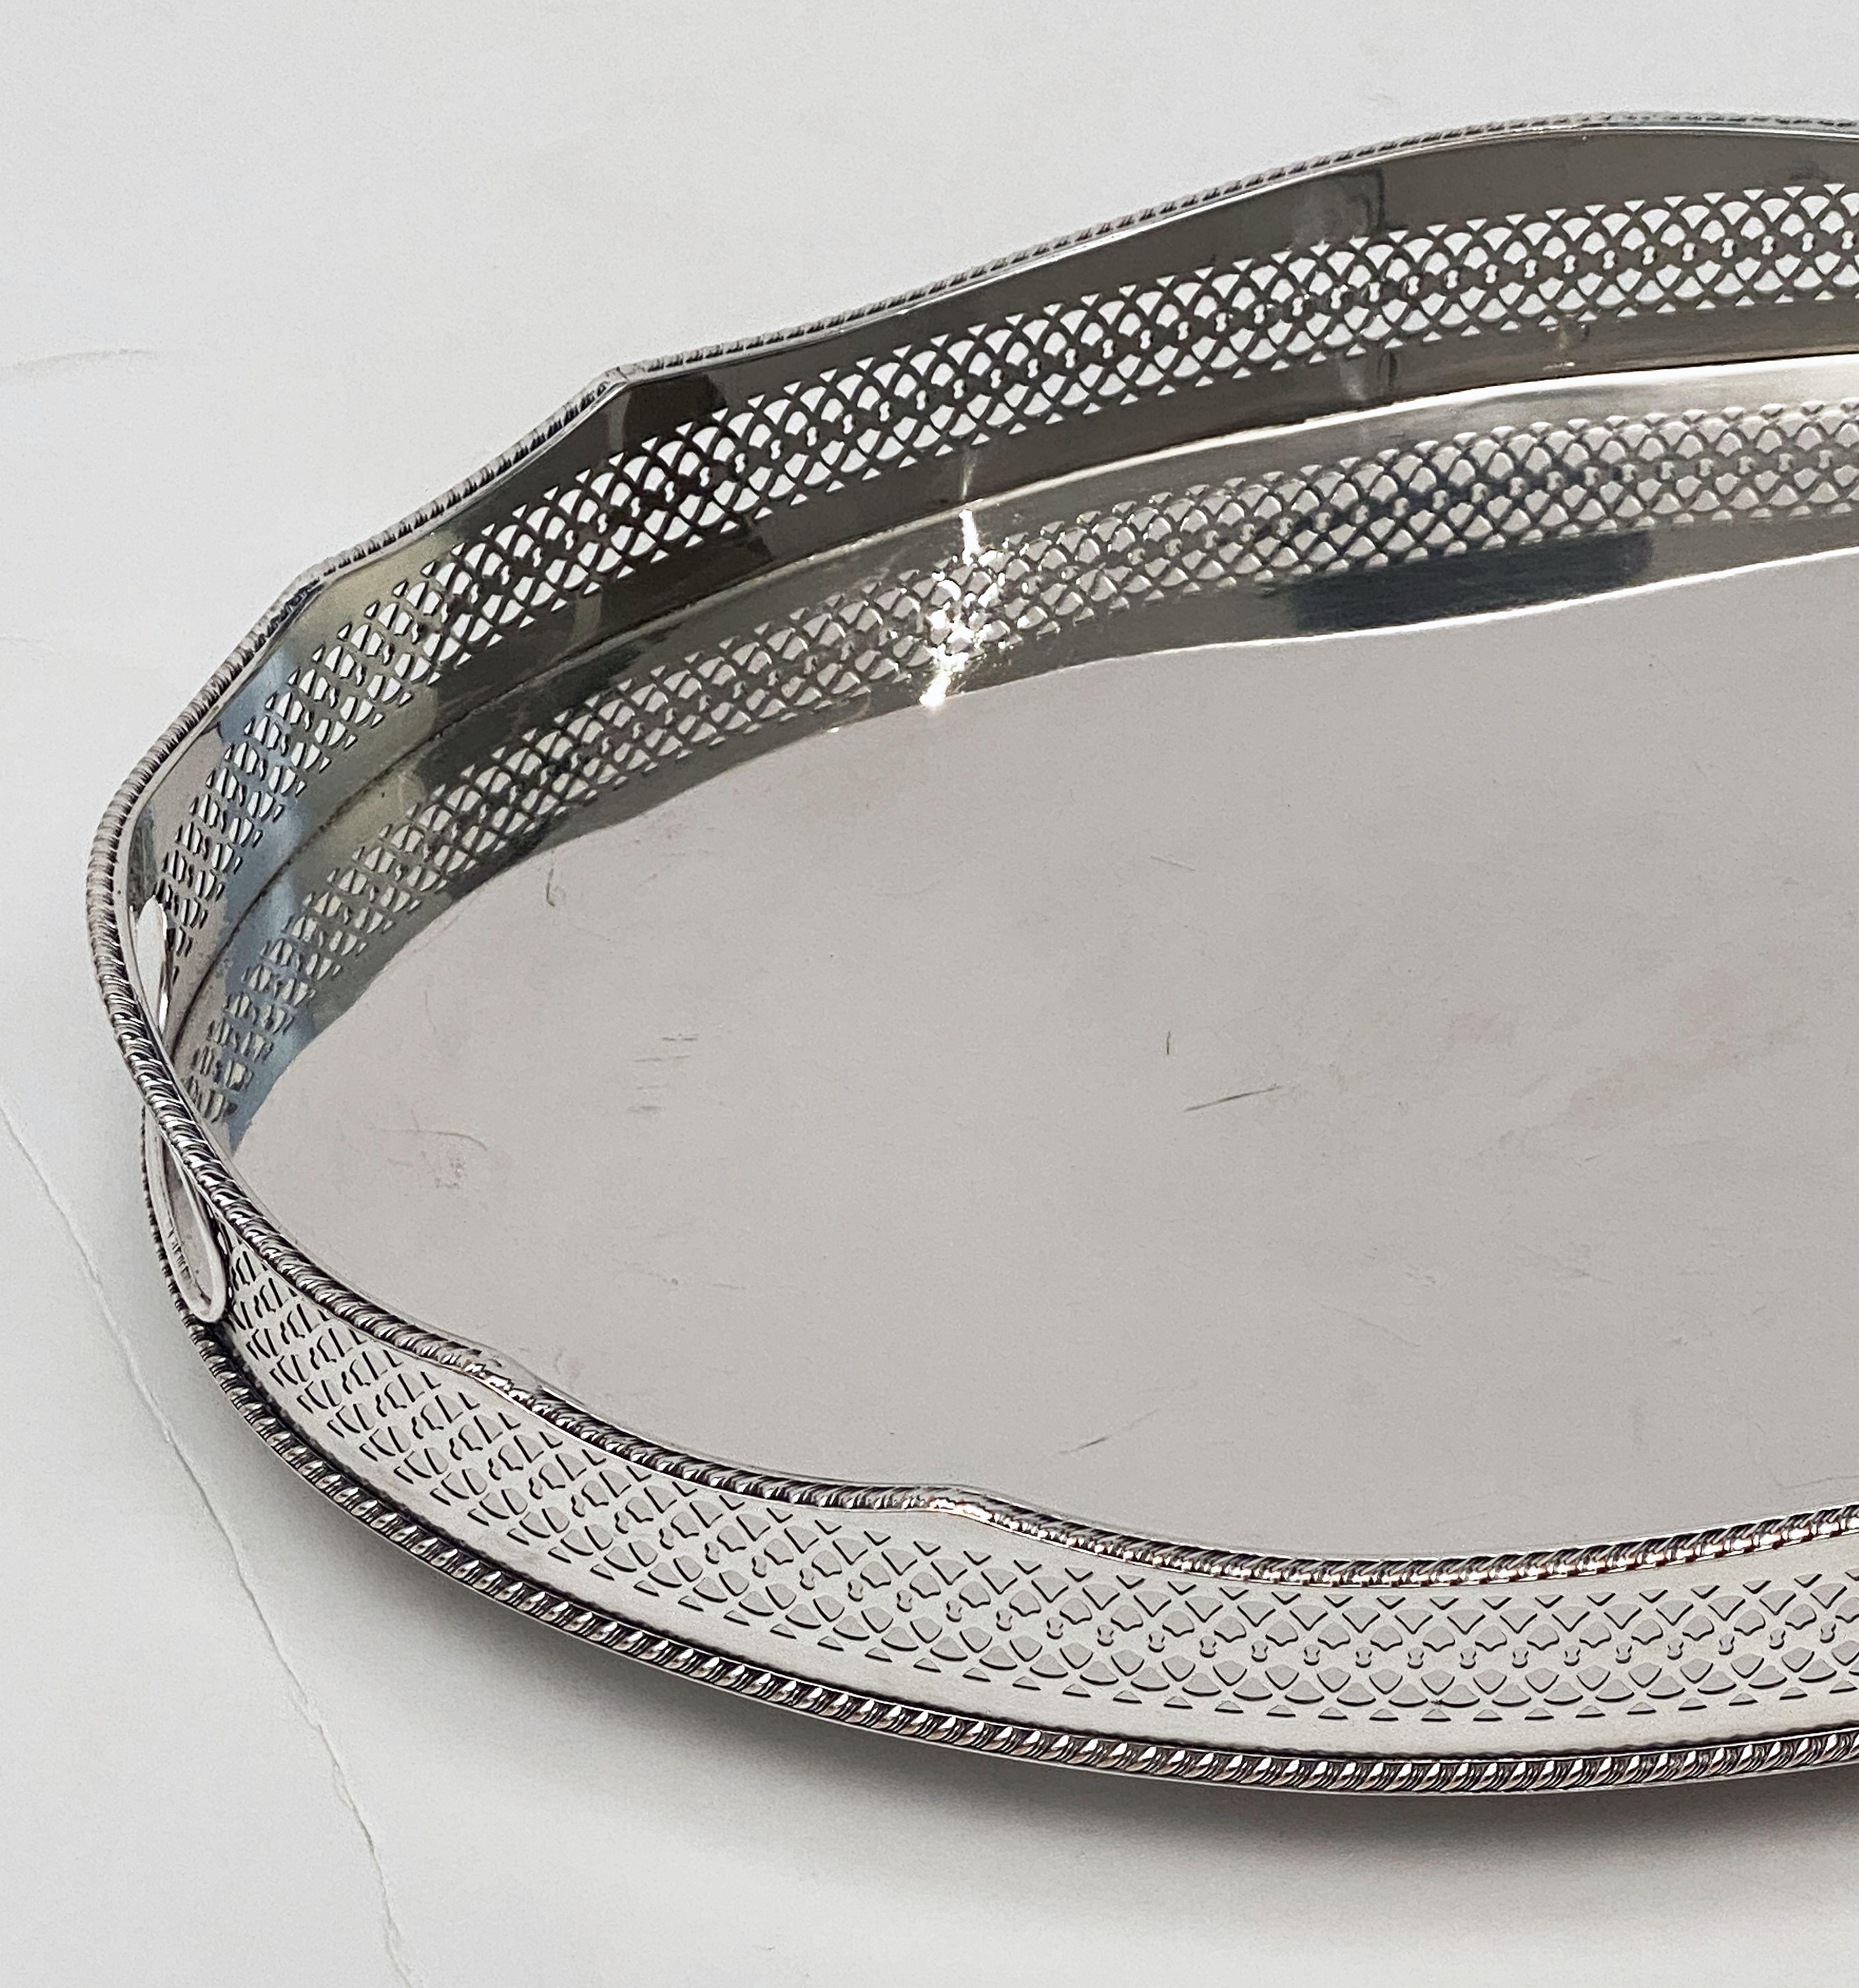 Pair of English Silver Oval Gallery Serving or Drinks Trays 'Priced as a Pair' 1